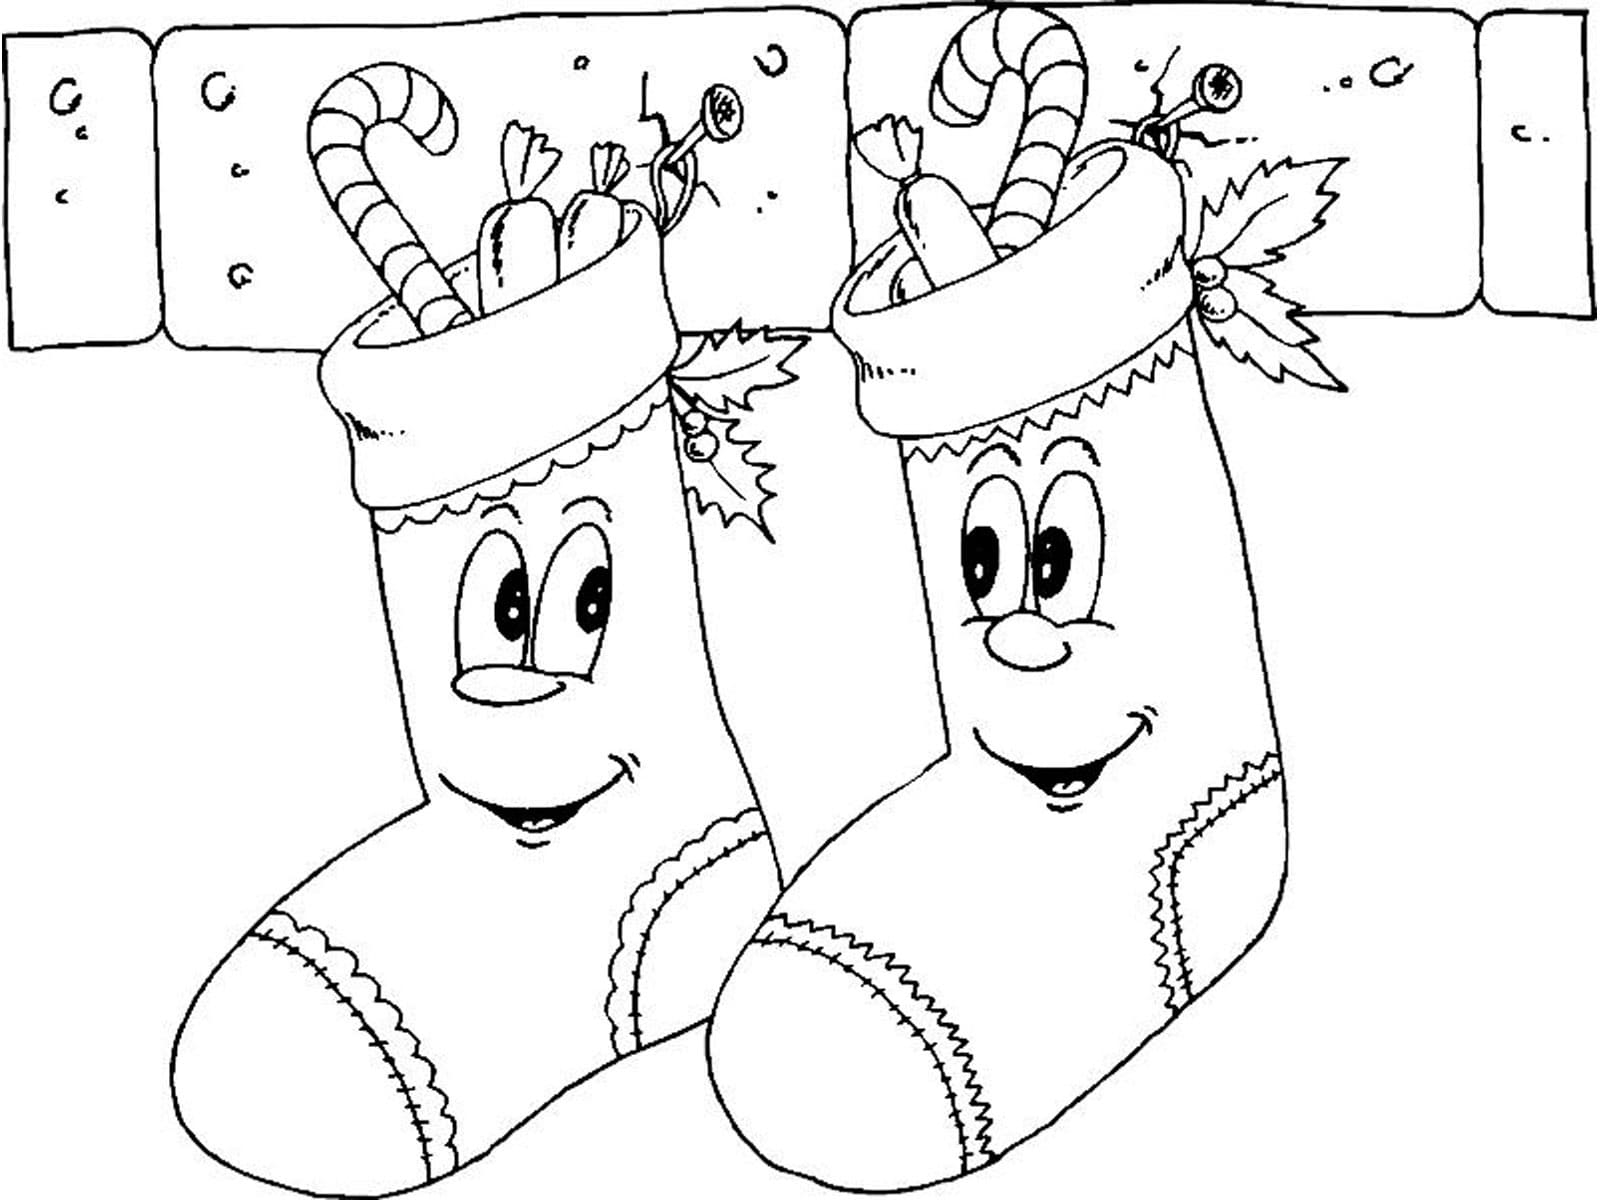 New Christmas Stocking Coloring Page